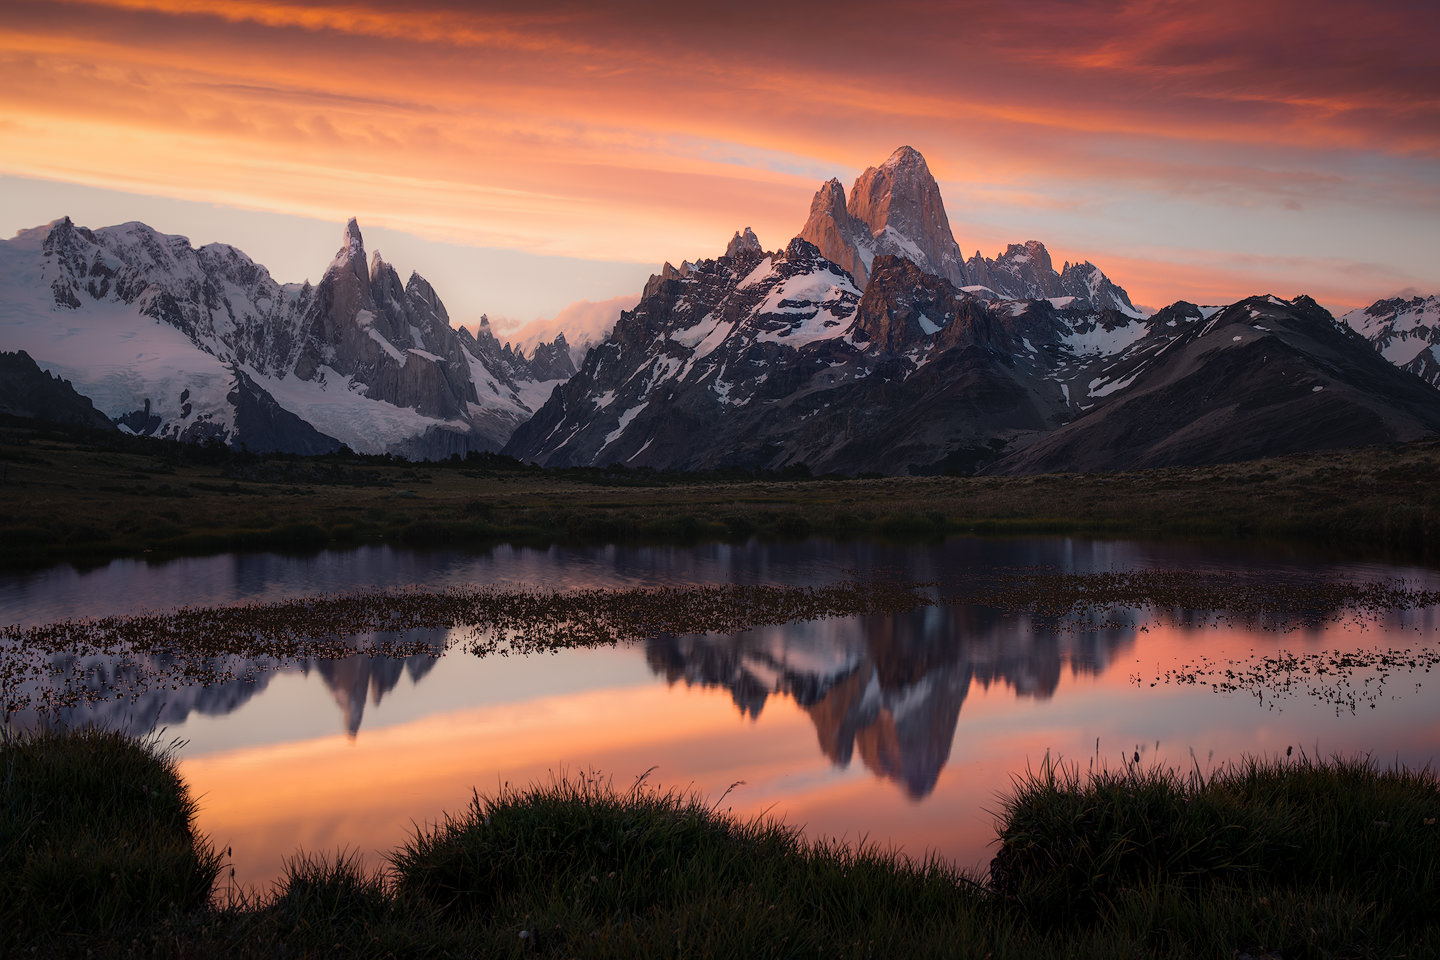 Cerro Torre and Fitz Roy reflected in an infinity pool during an intense sunset.